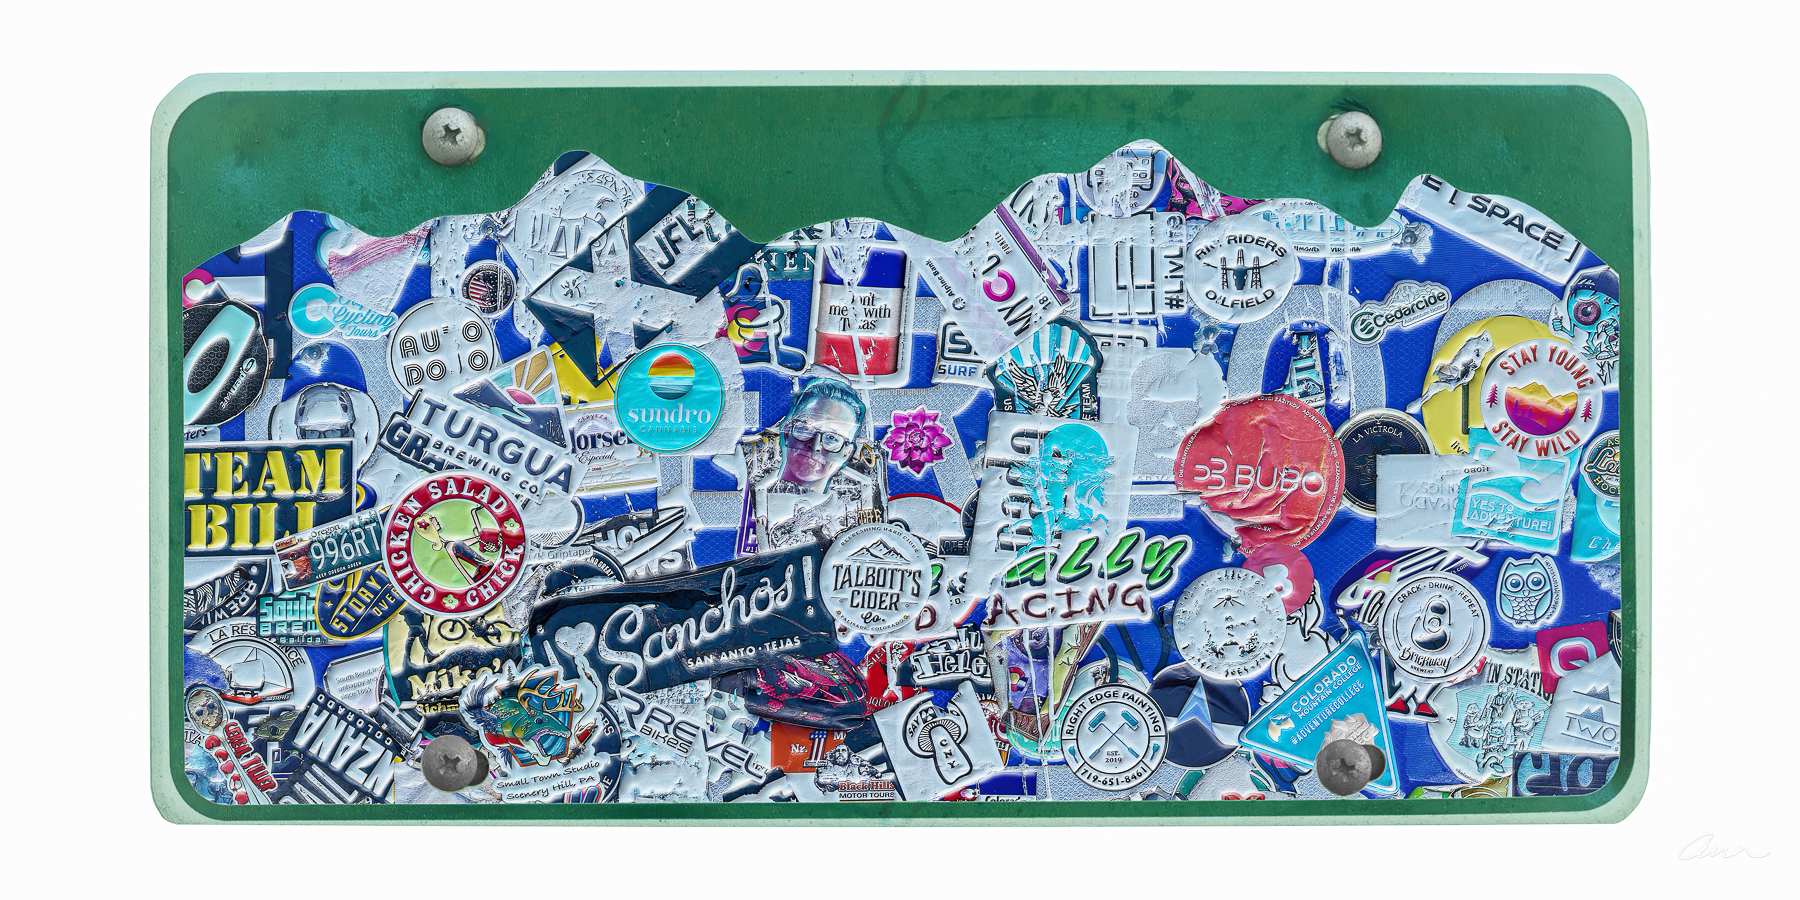 A Colorado license plate's mountain scene is covered with sticker culture.